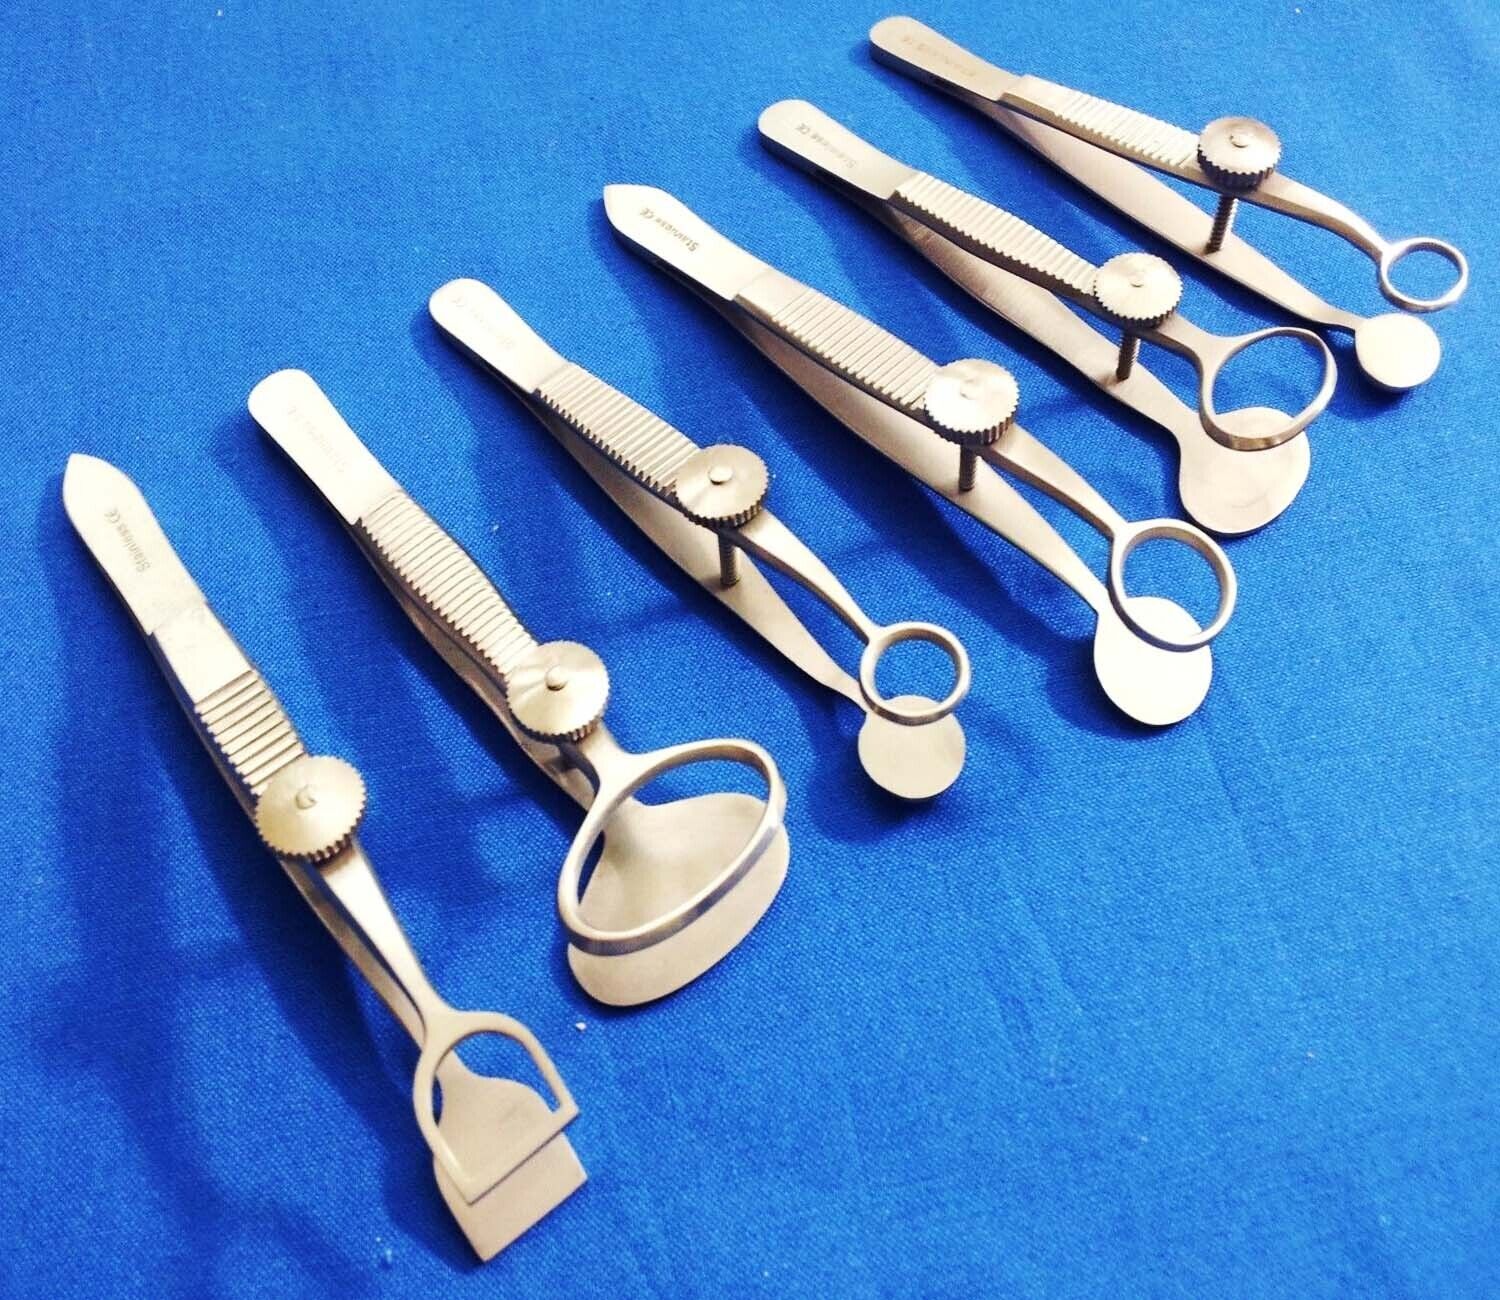 New O.R Grade Chalazion Forceps Surgical Dermal Ophthalmic 6 Pcs Instruments